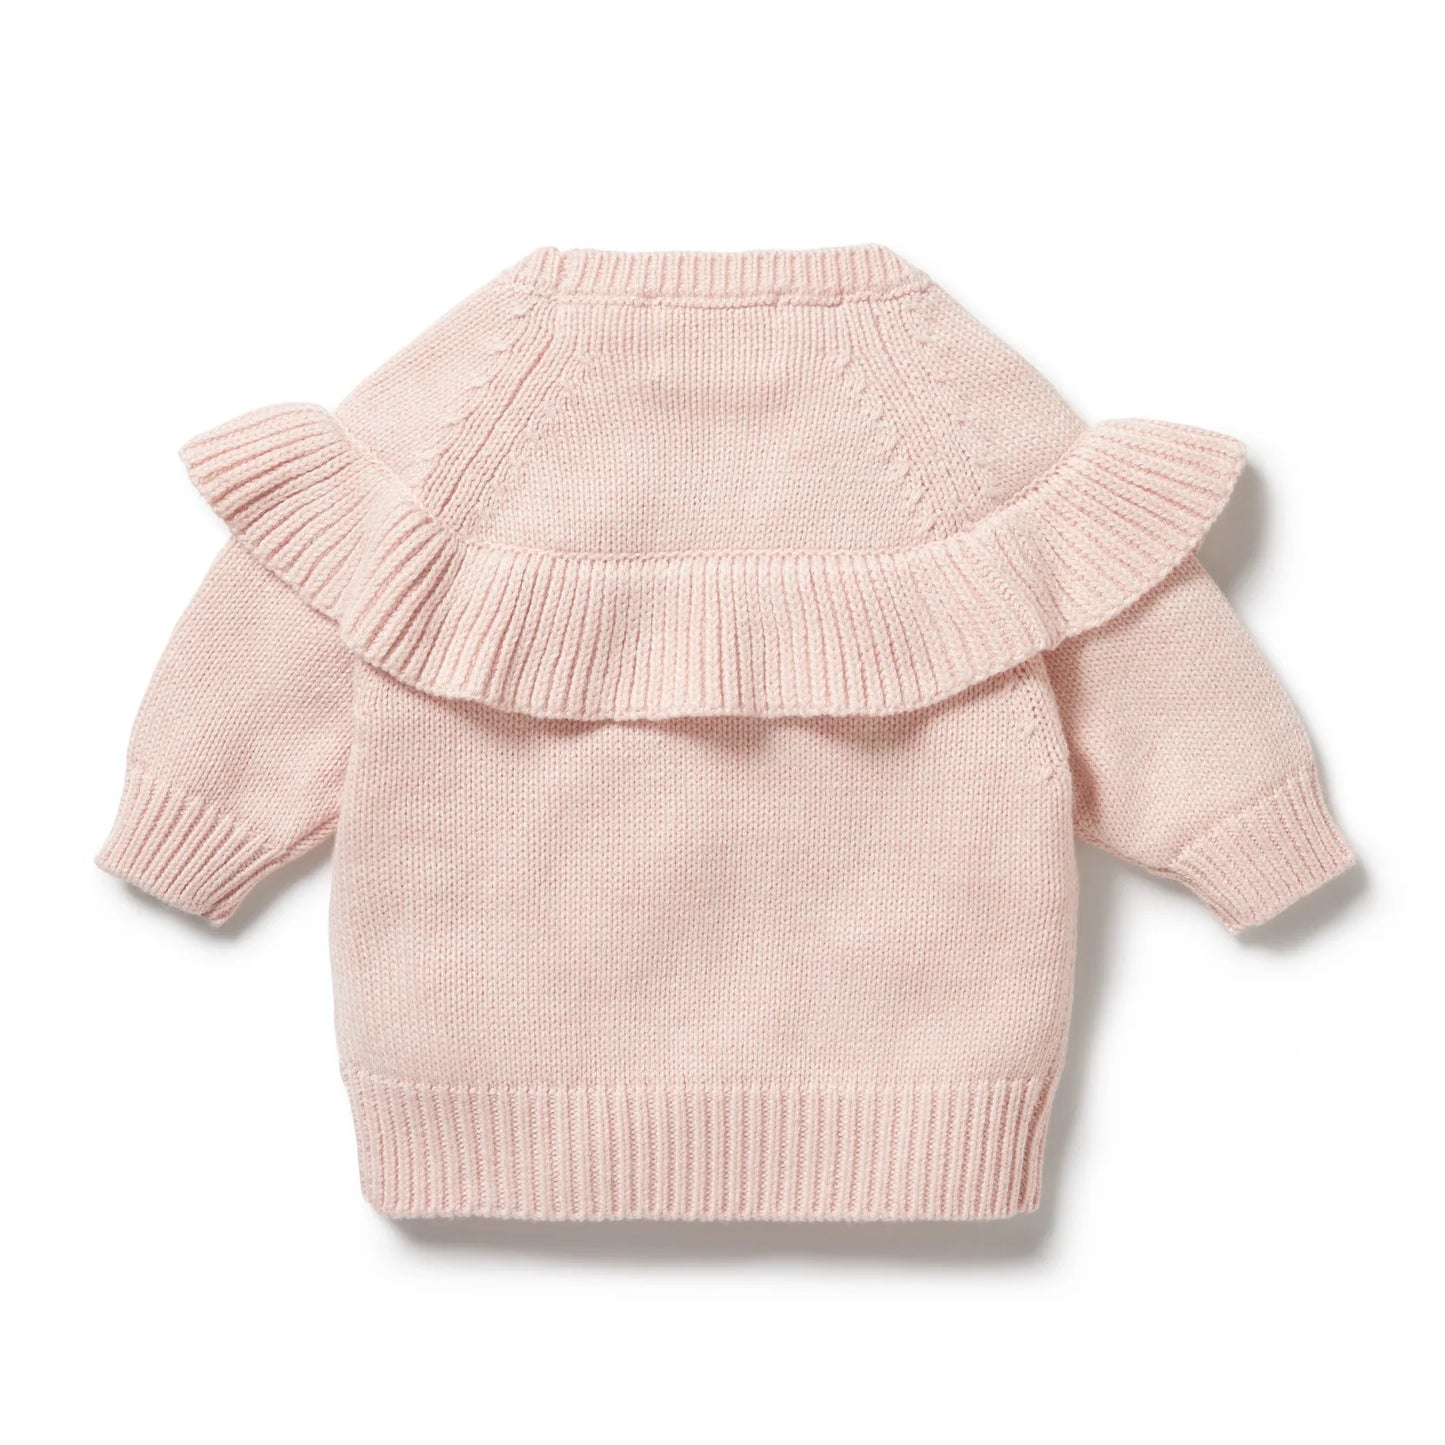 Knitted Ruffle Jumper - Pink